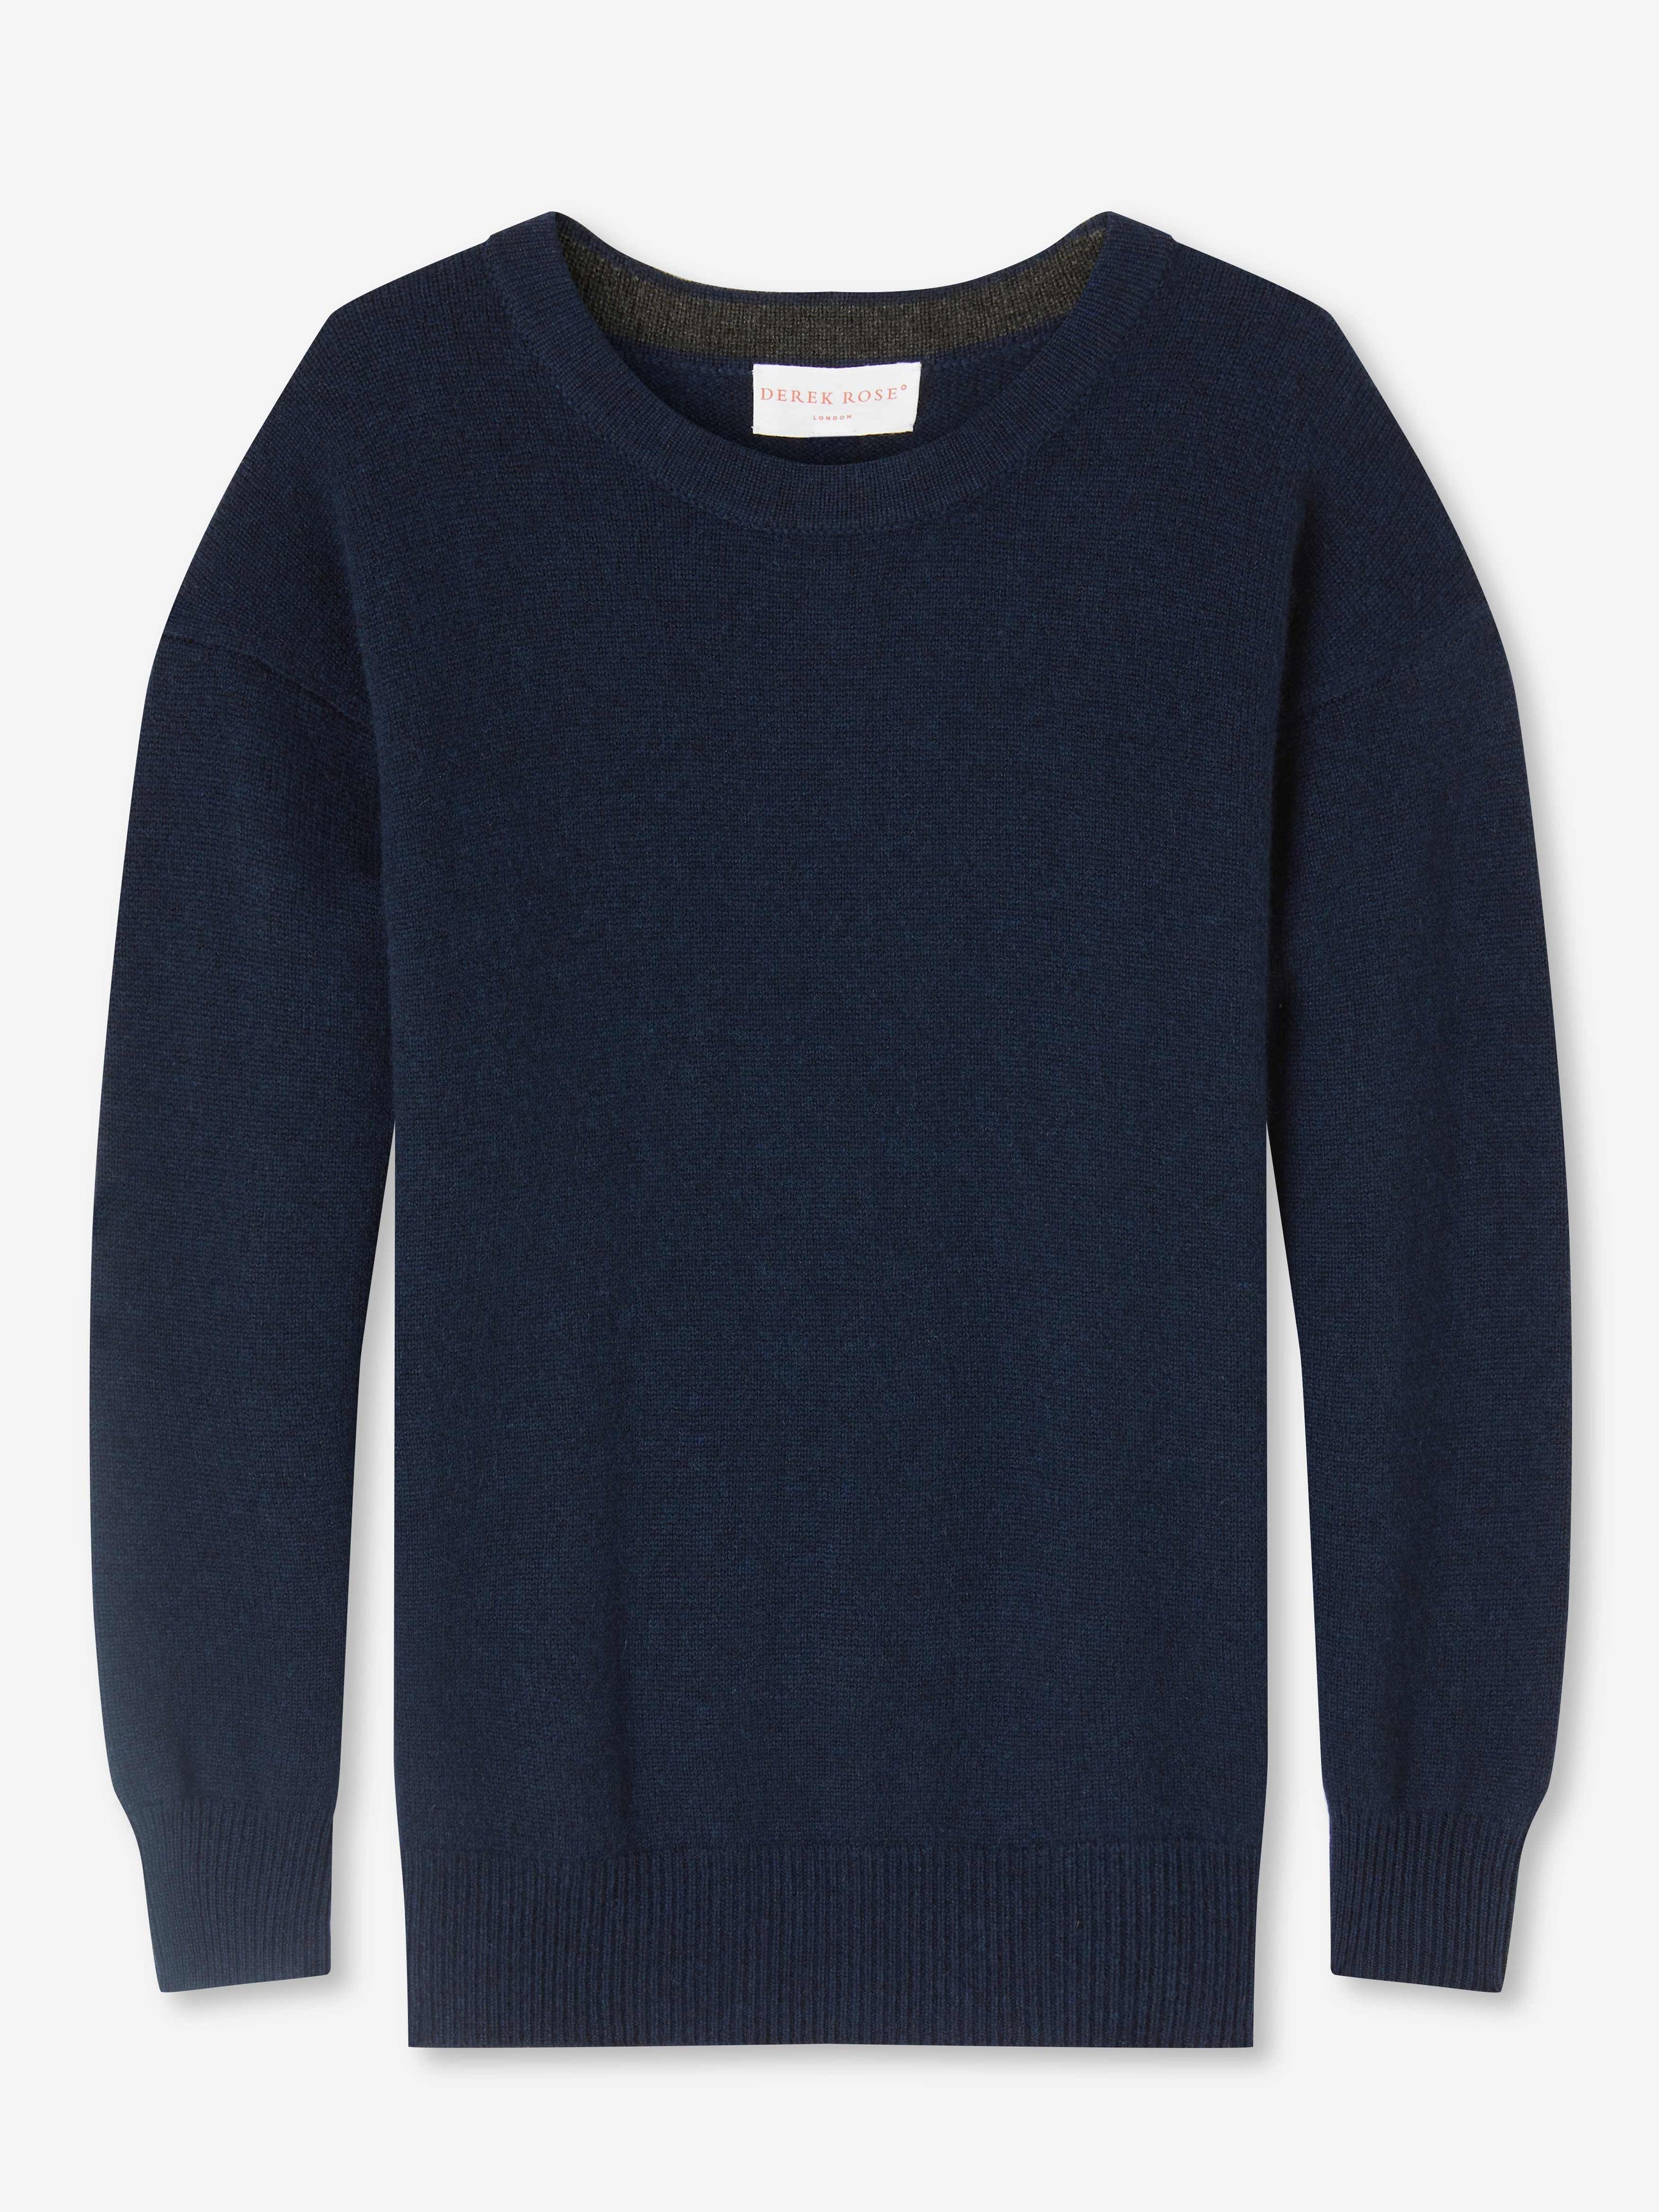 Women's Relaxed Sweater Daphne Cashmere Navy